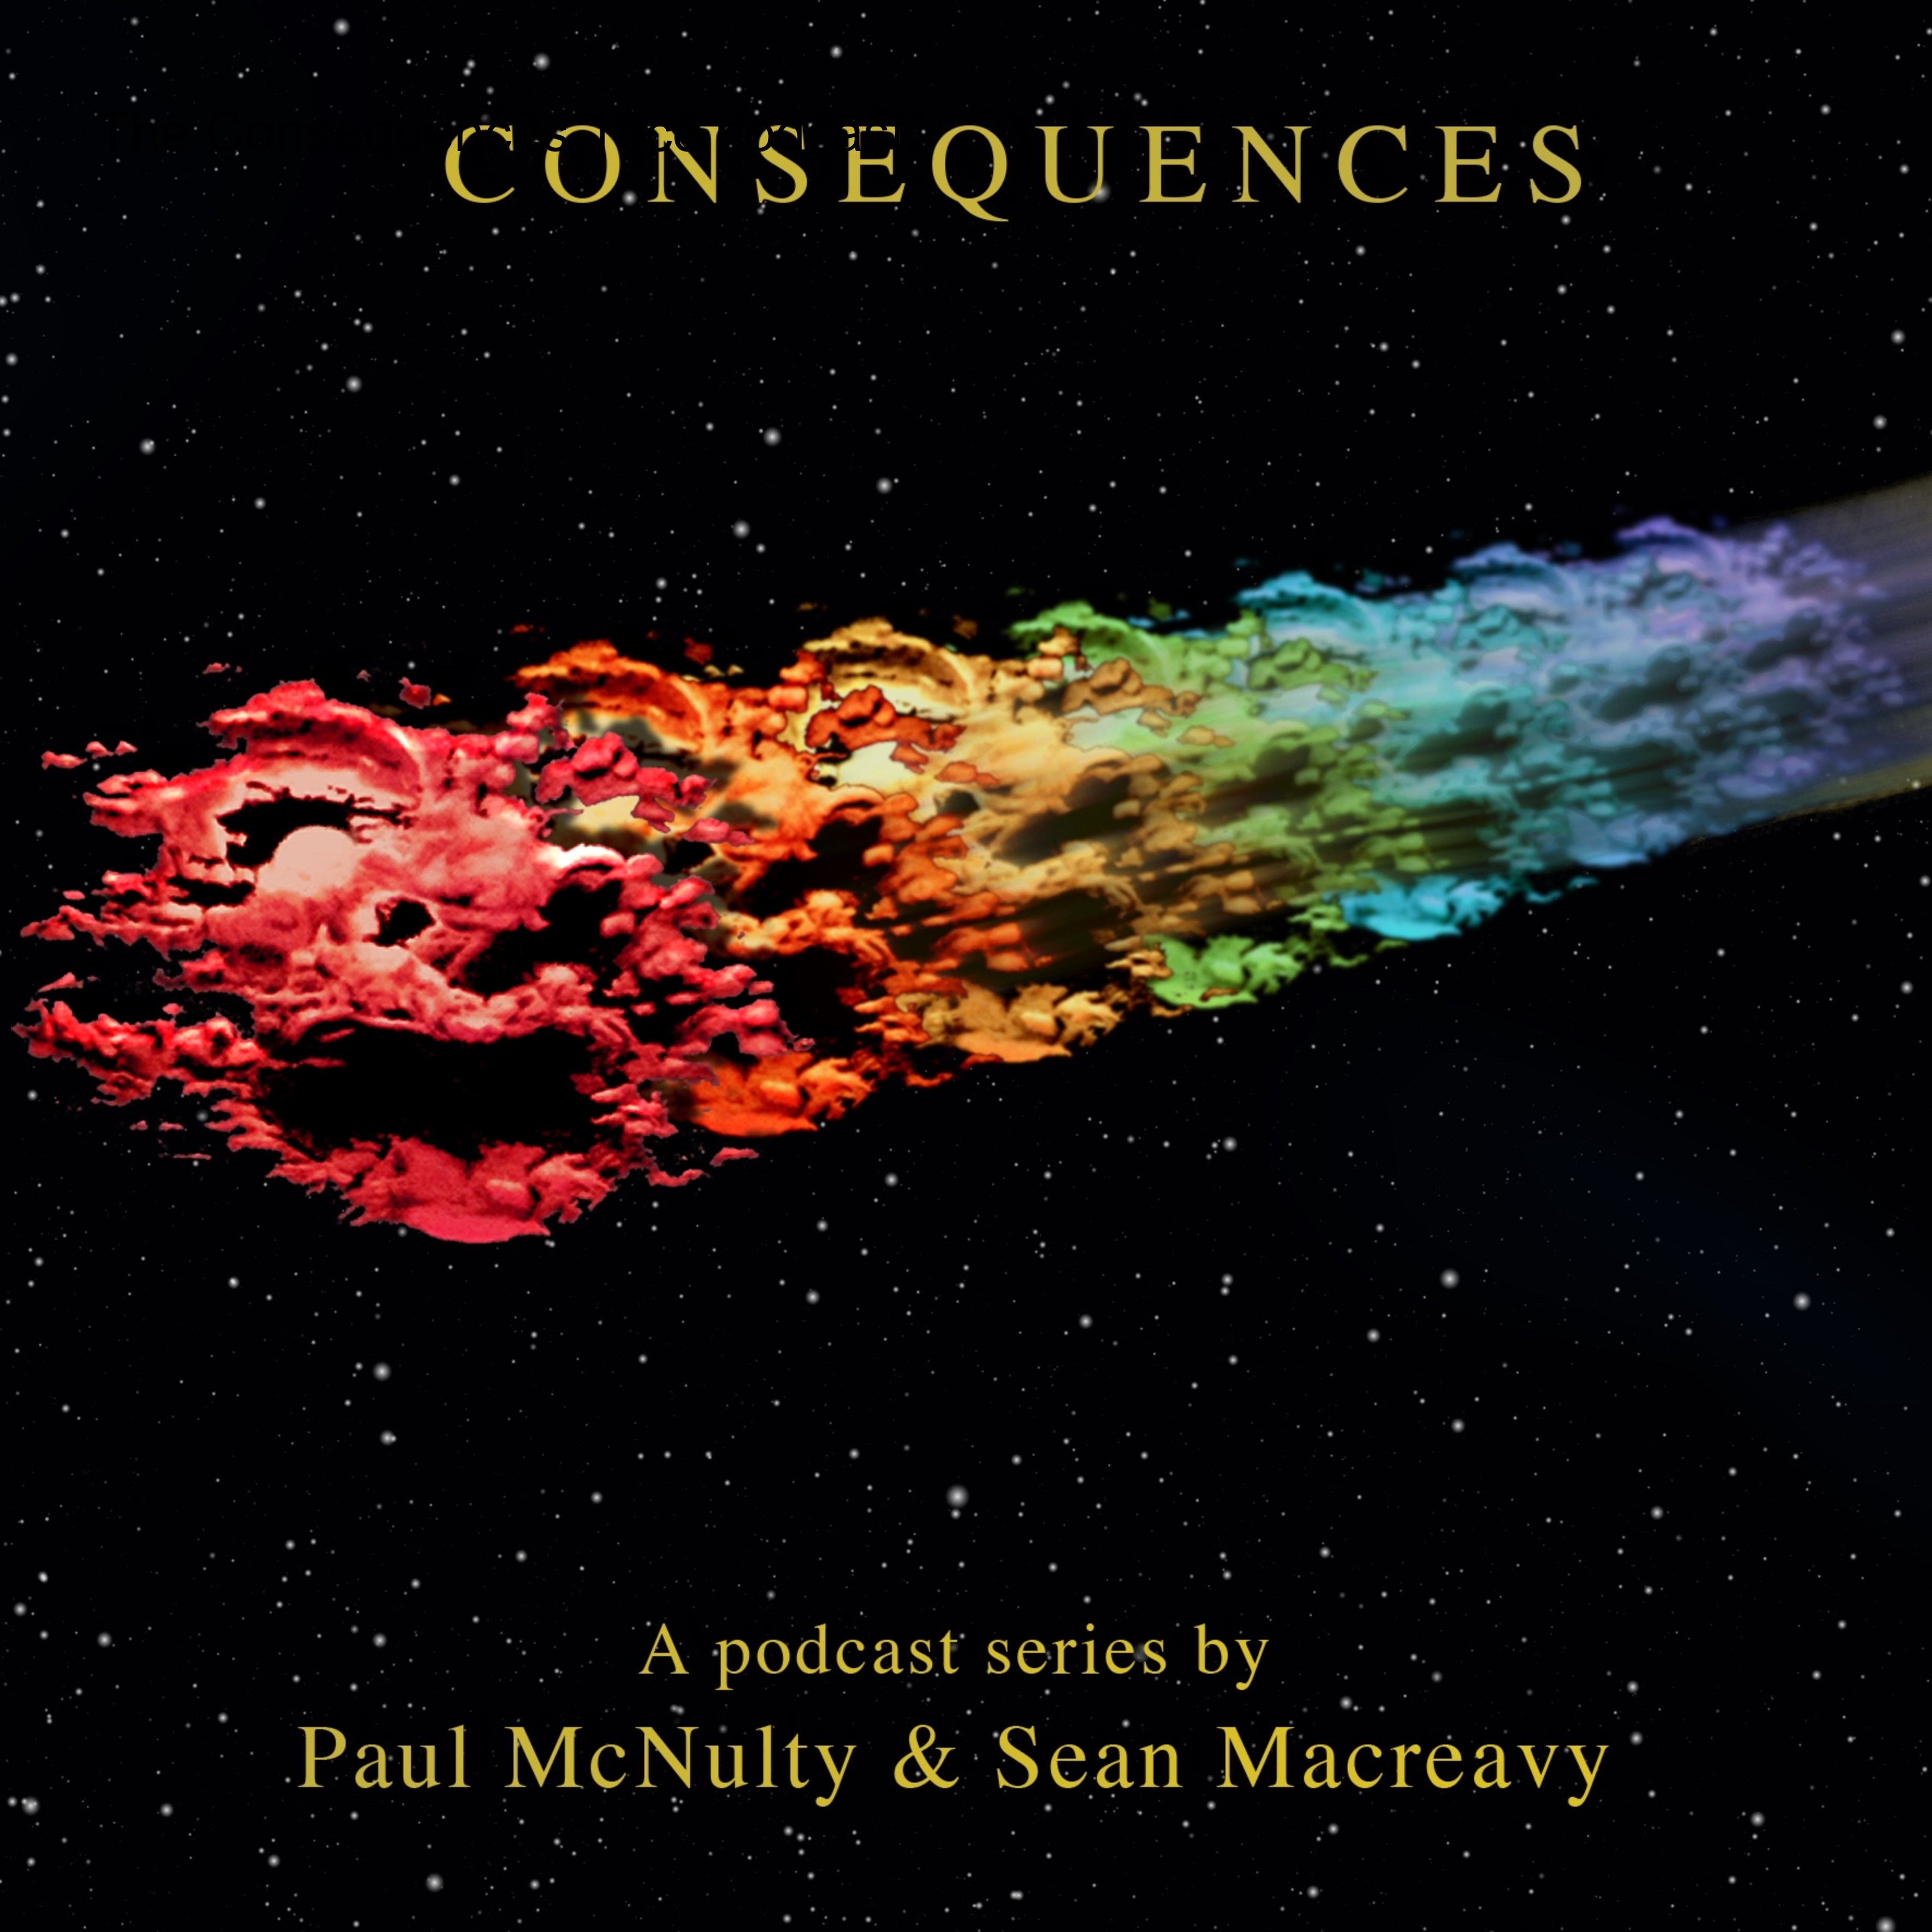 The Consequences Podcast